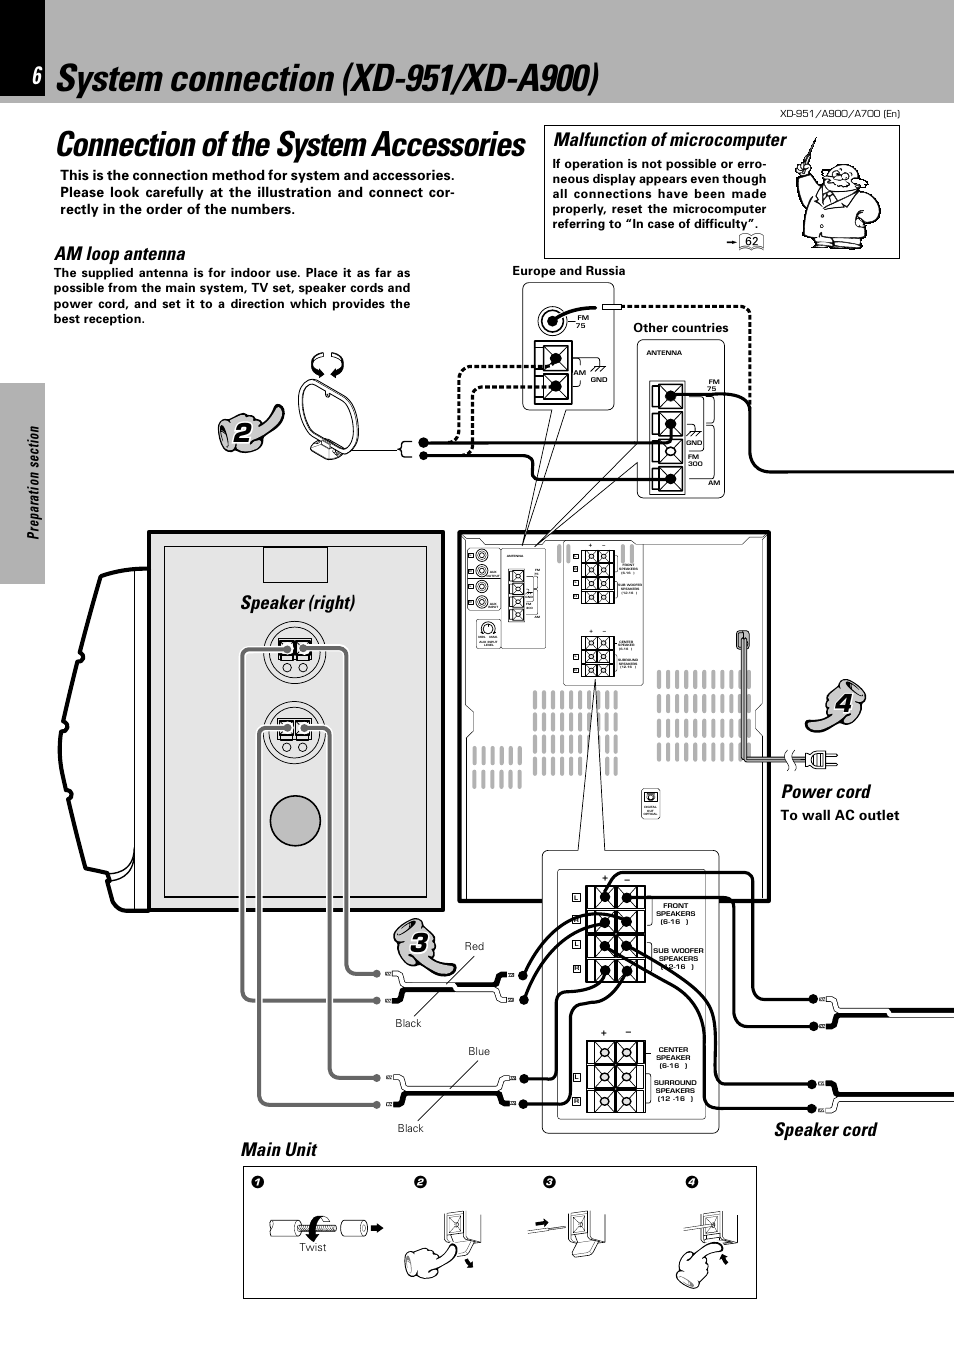 System connection (xd-951/xd-a900), Connection of the system accessories,  Am loop antenna | Kenwood XD-A900 User Manual | Page 6 / 68 | Original mode